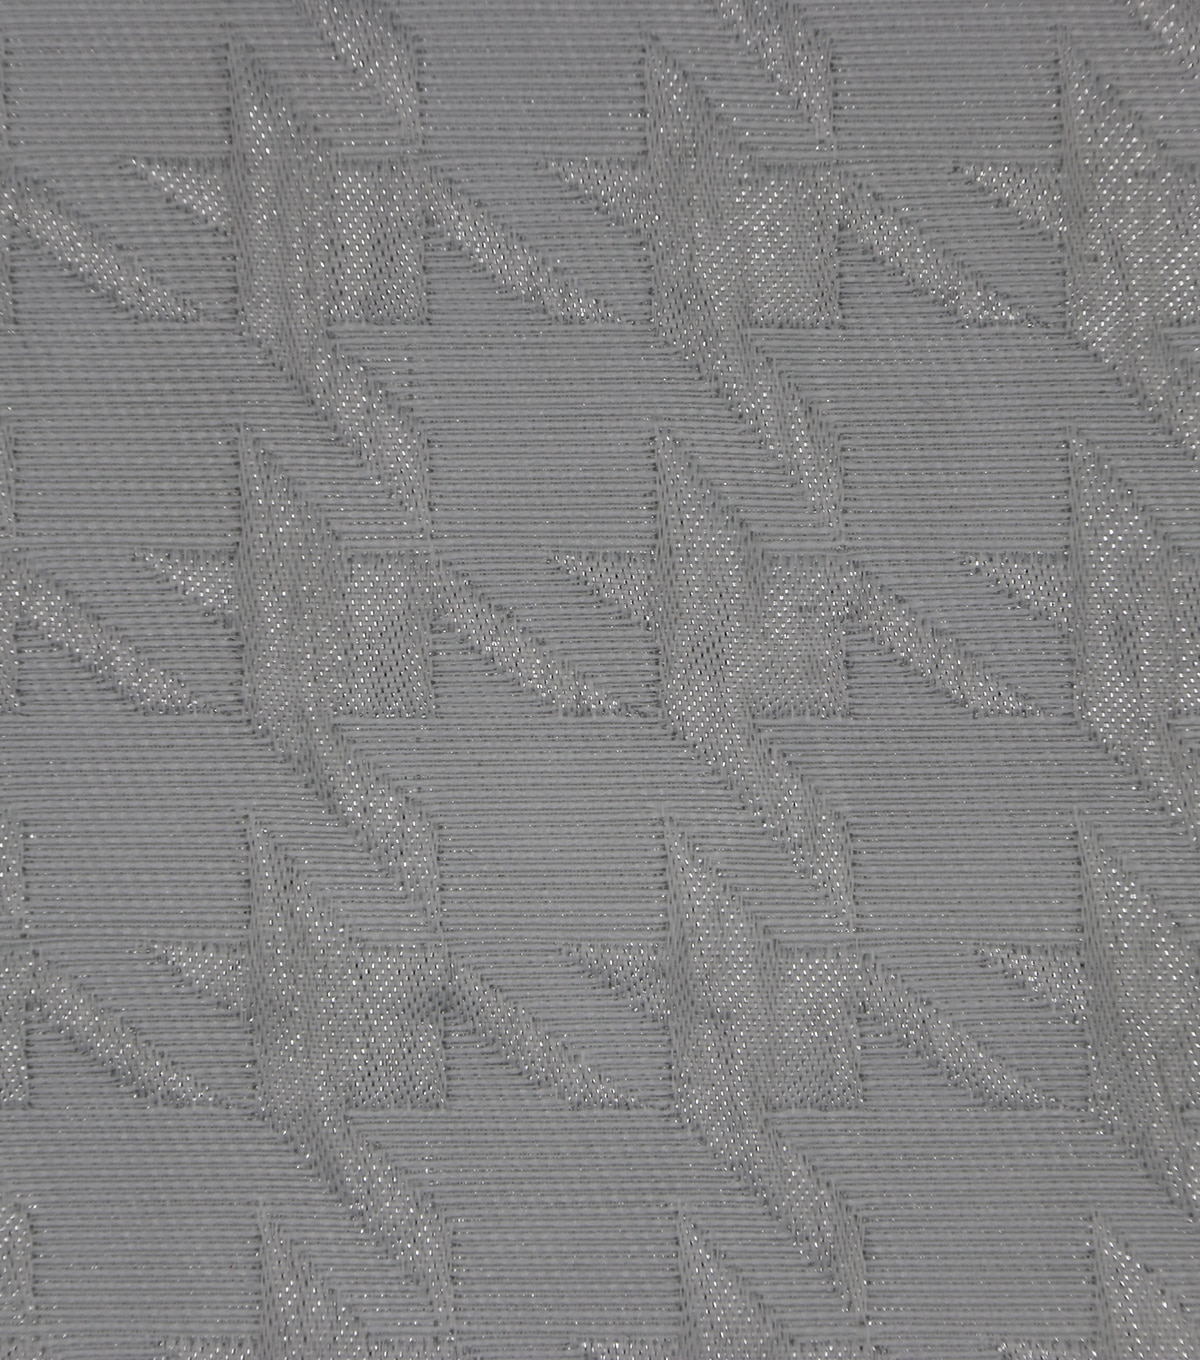 Jacquard Fabric White & Silver Houndstooth | JOANN